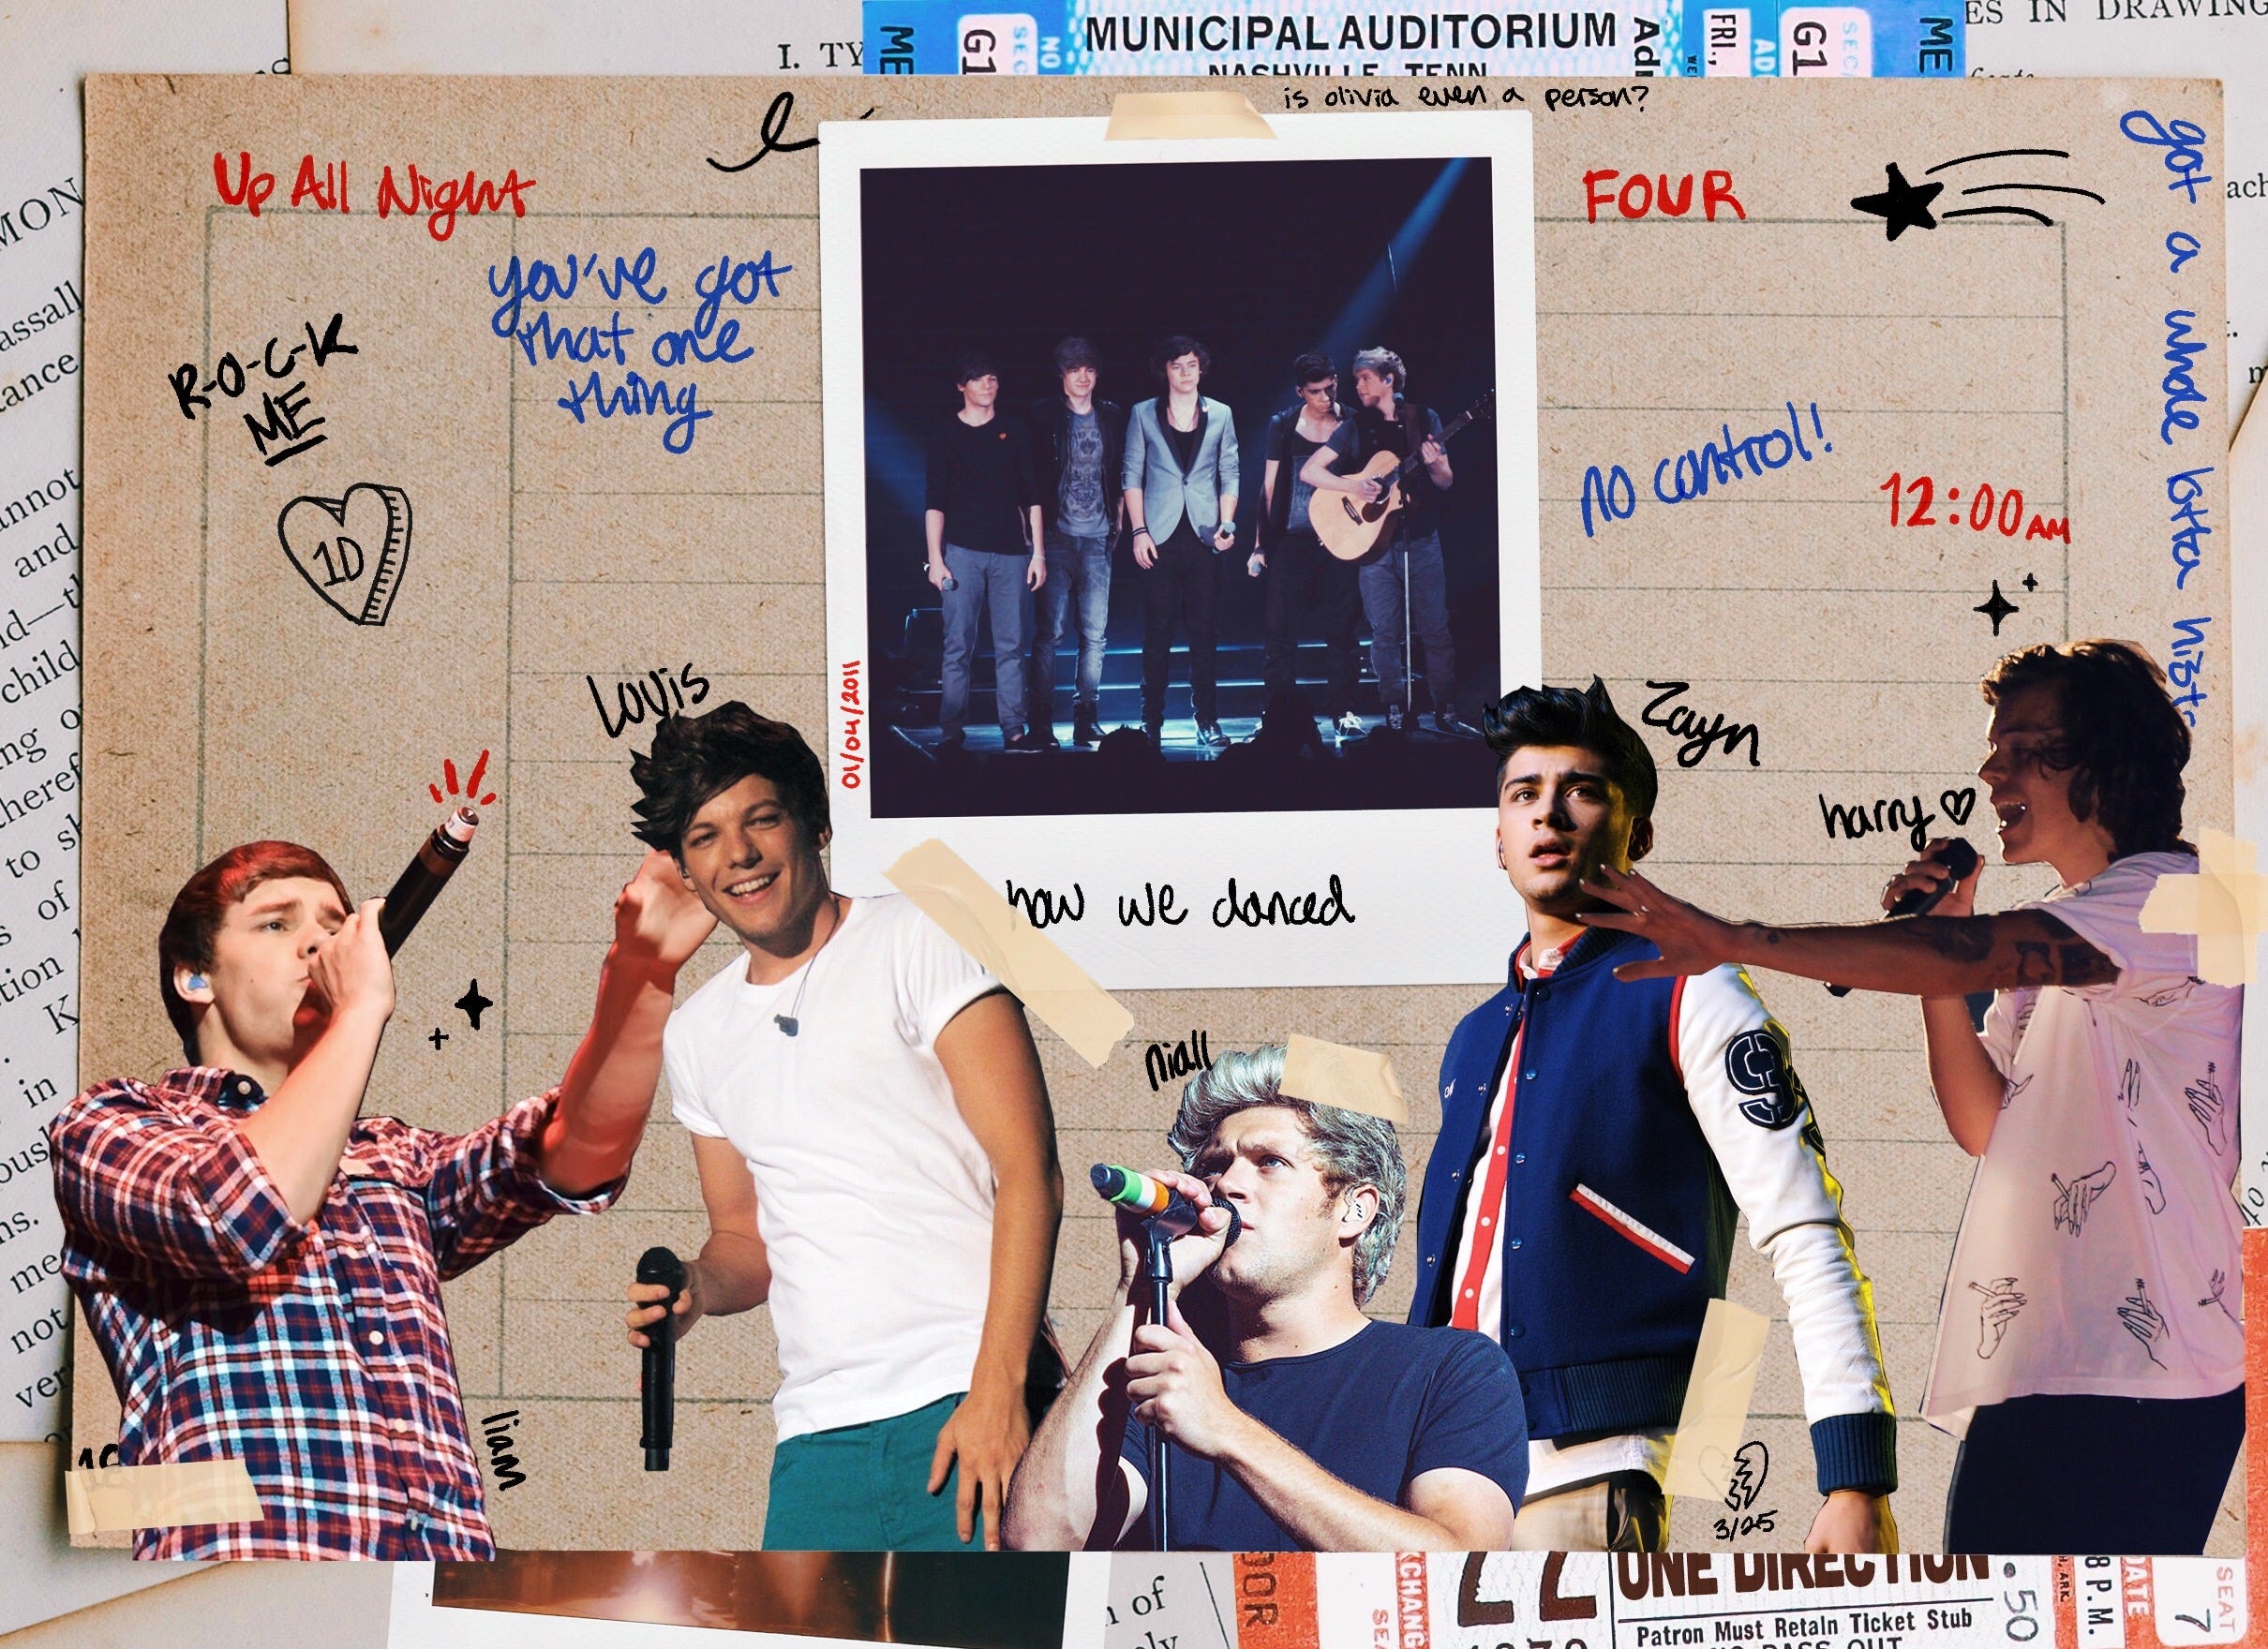 All 91 One Direction songs, ranked | by Julianna Ress | Medium